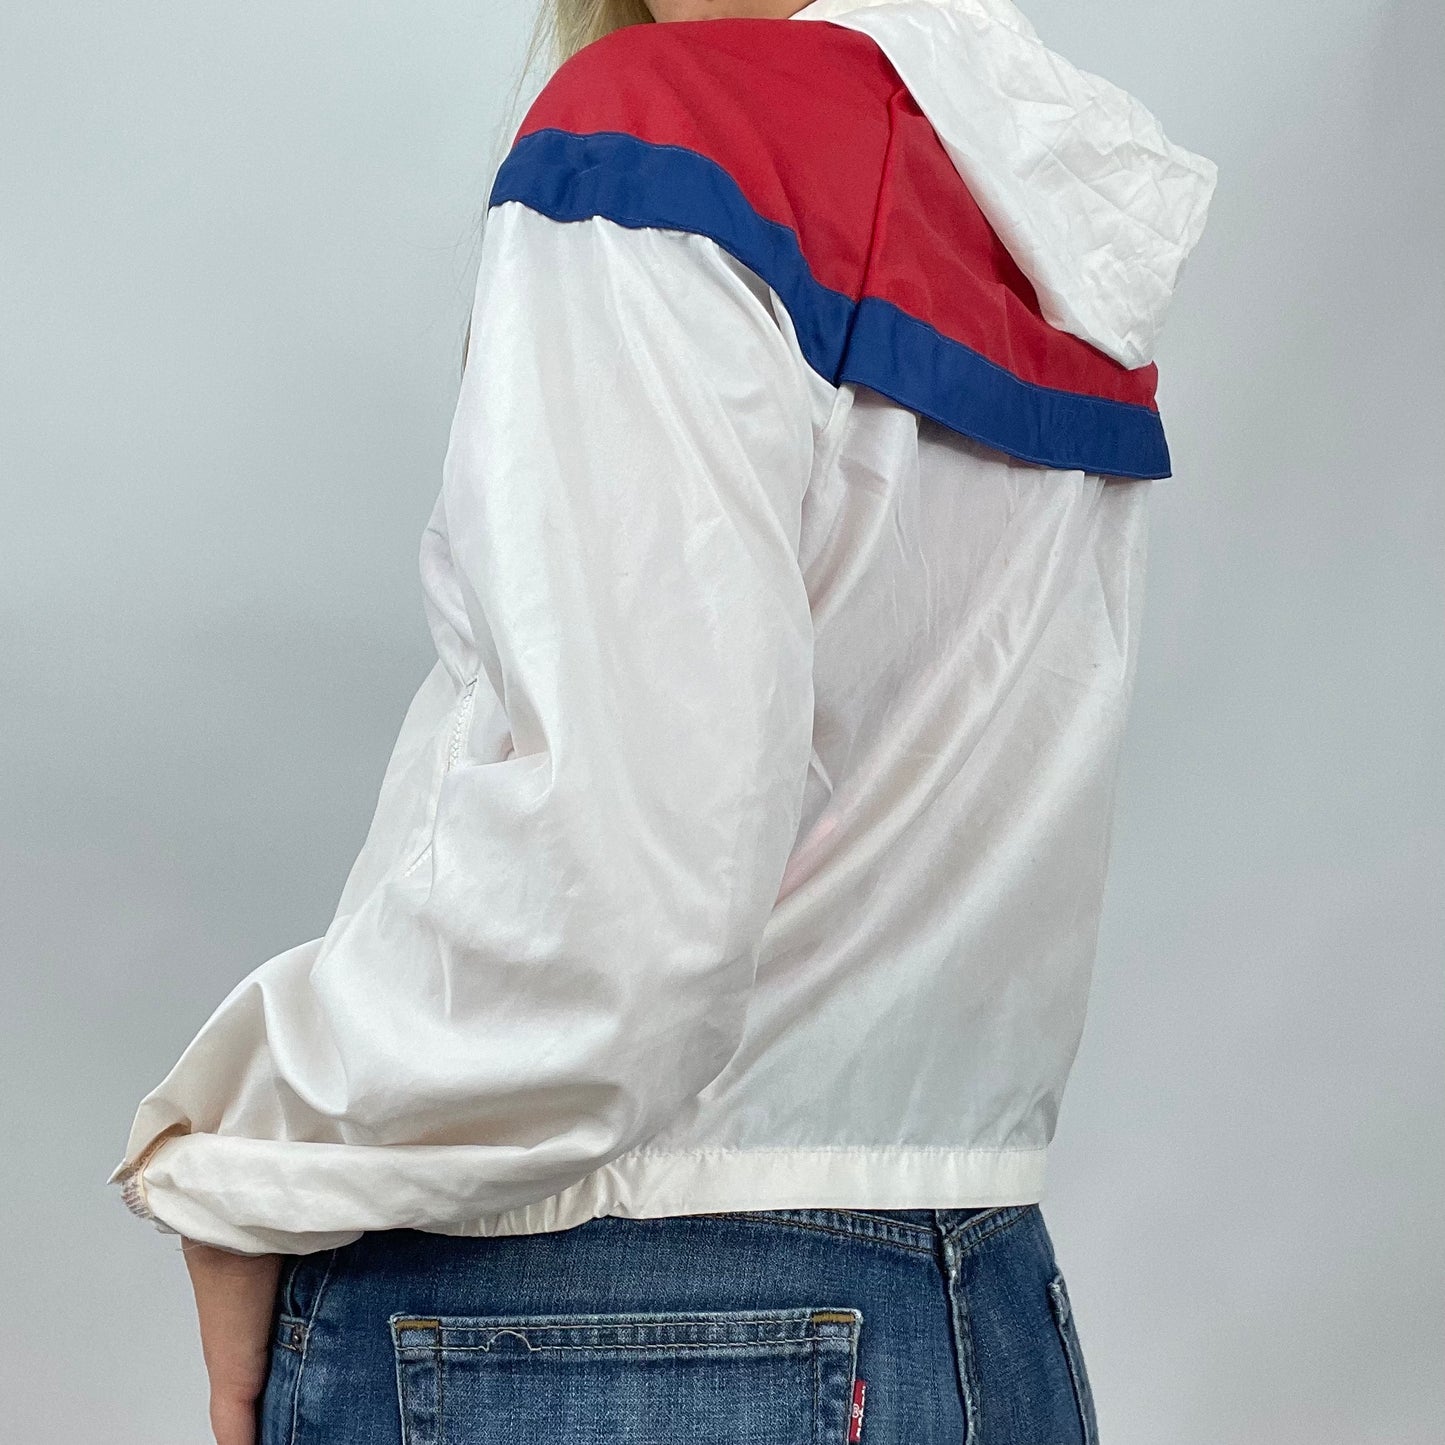 HAILEY BIEBER DROP | small white, red & blue nike shell style zip up